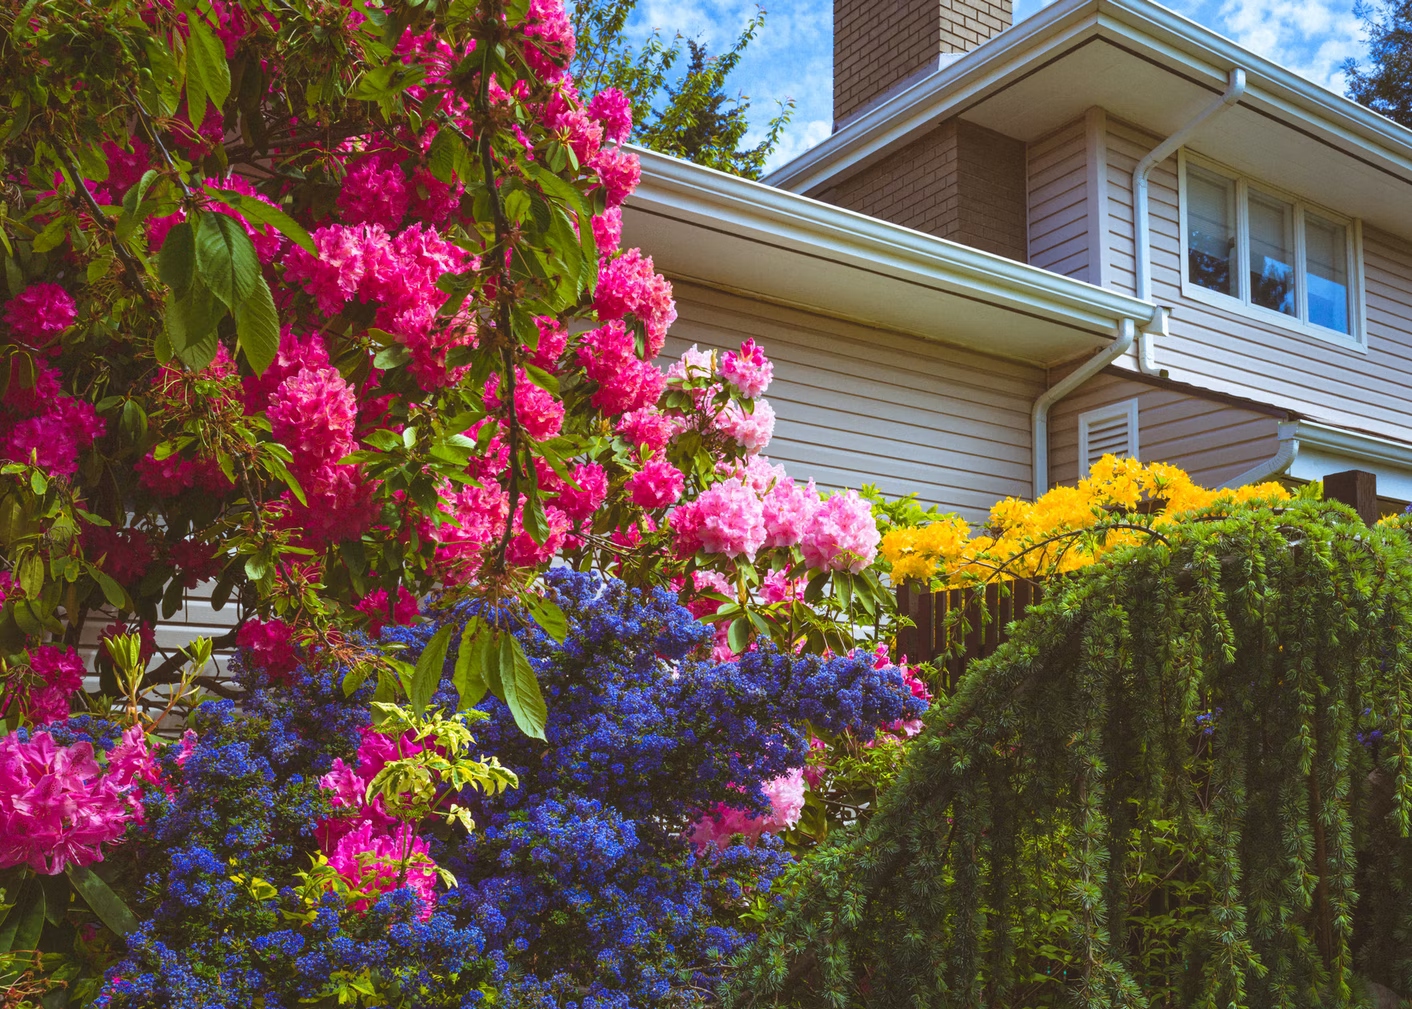 A flower-filled garden in front of a house.